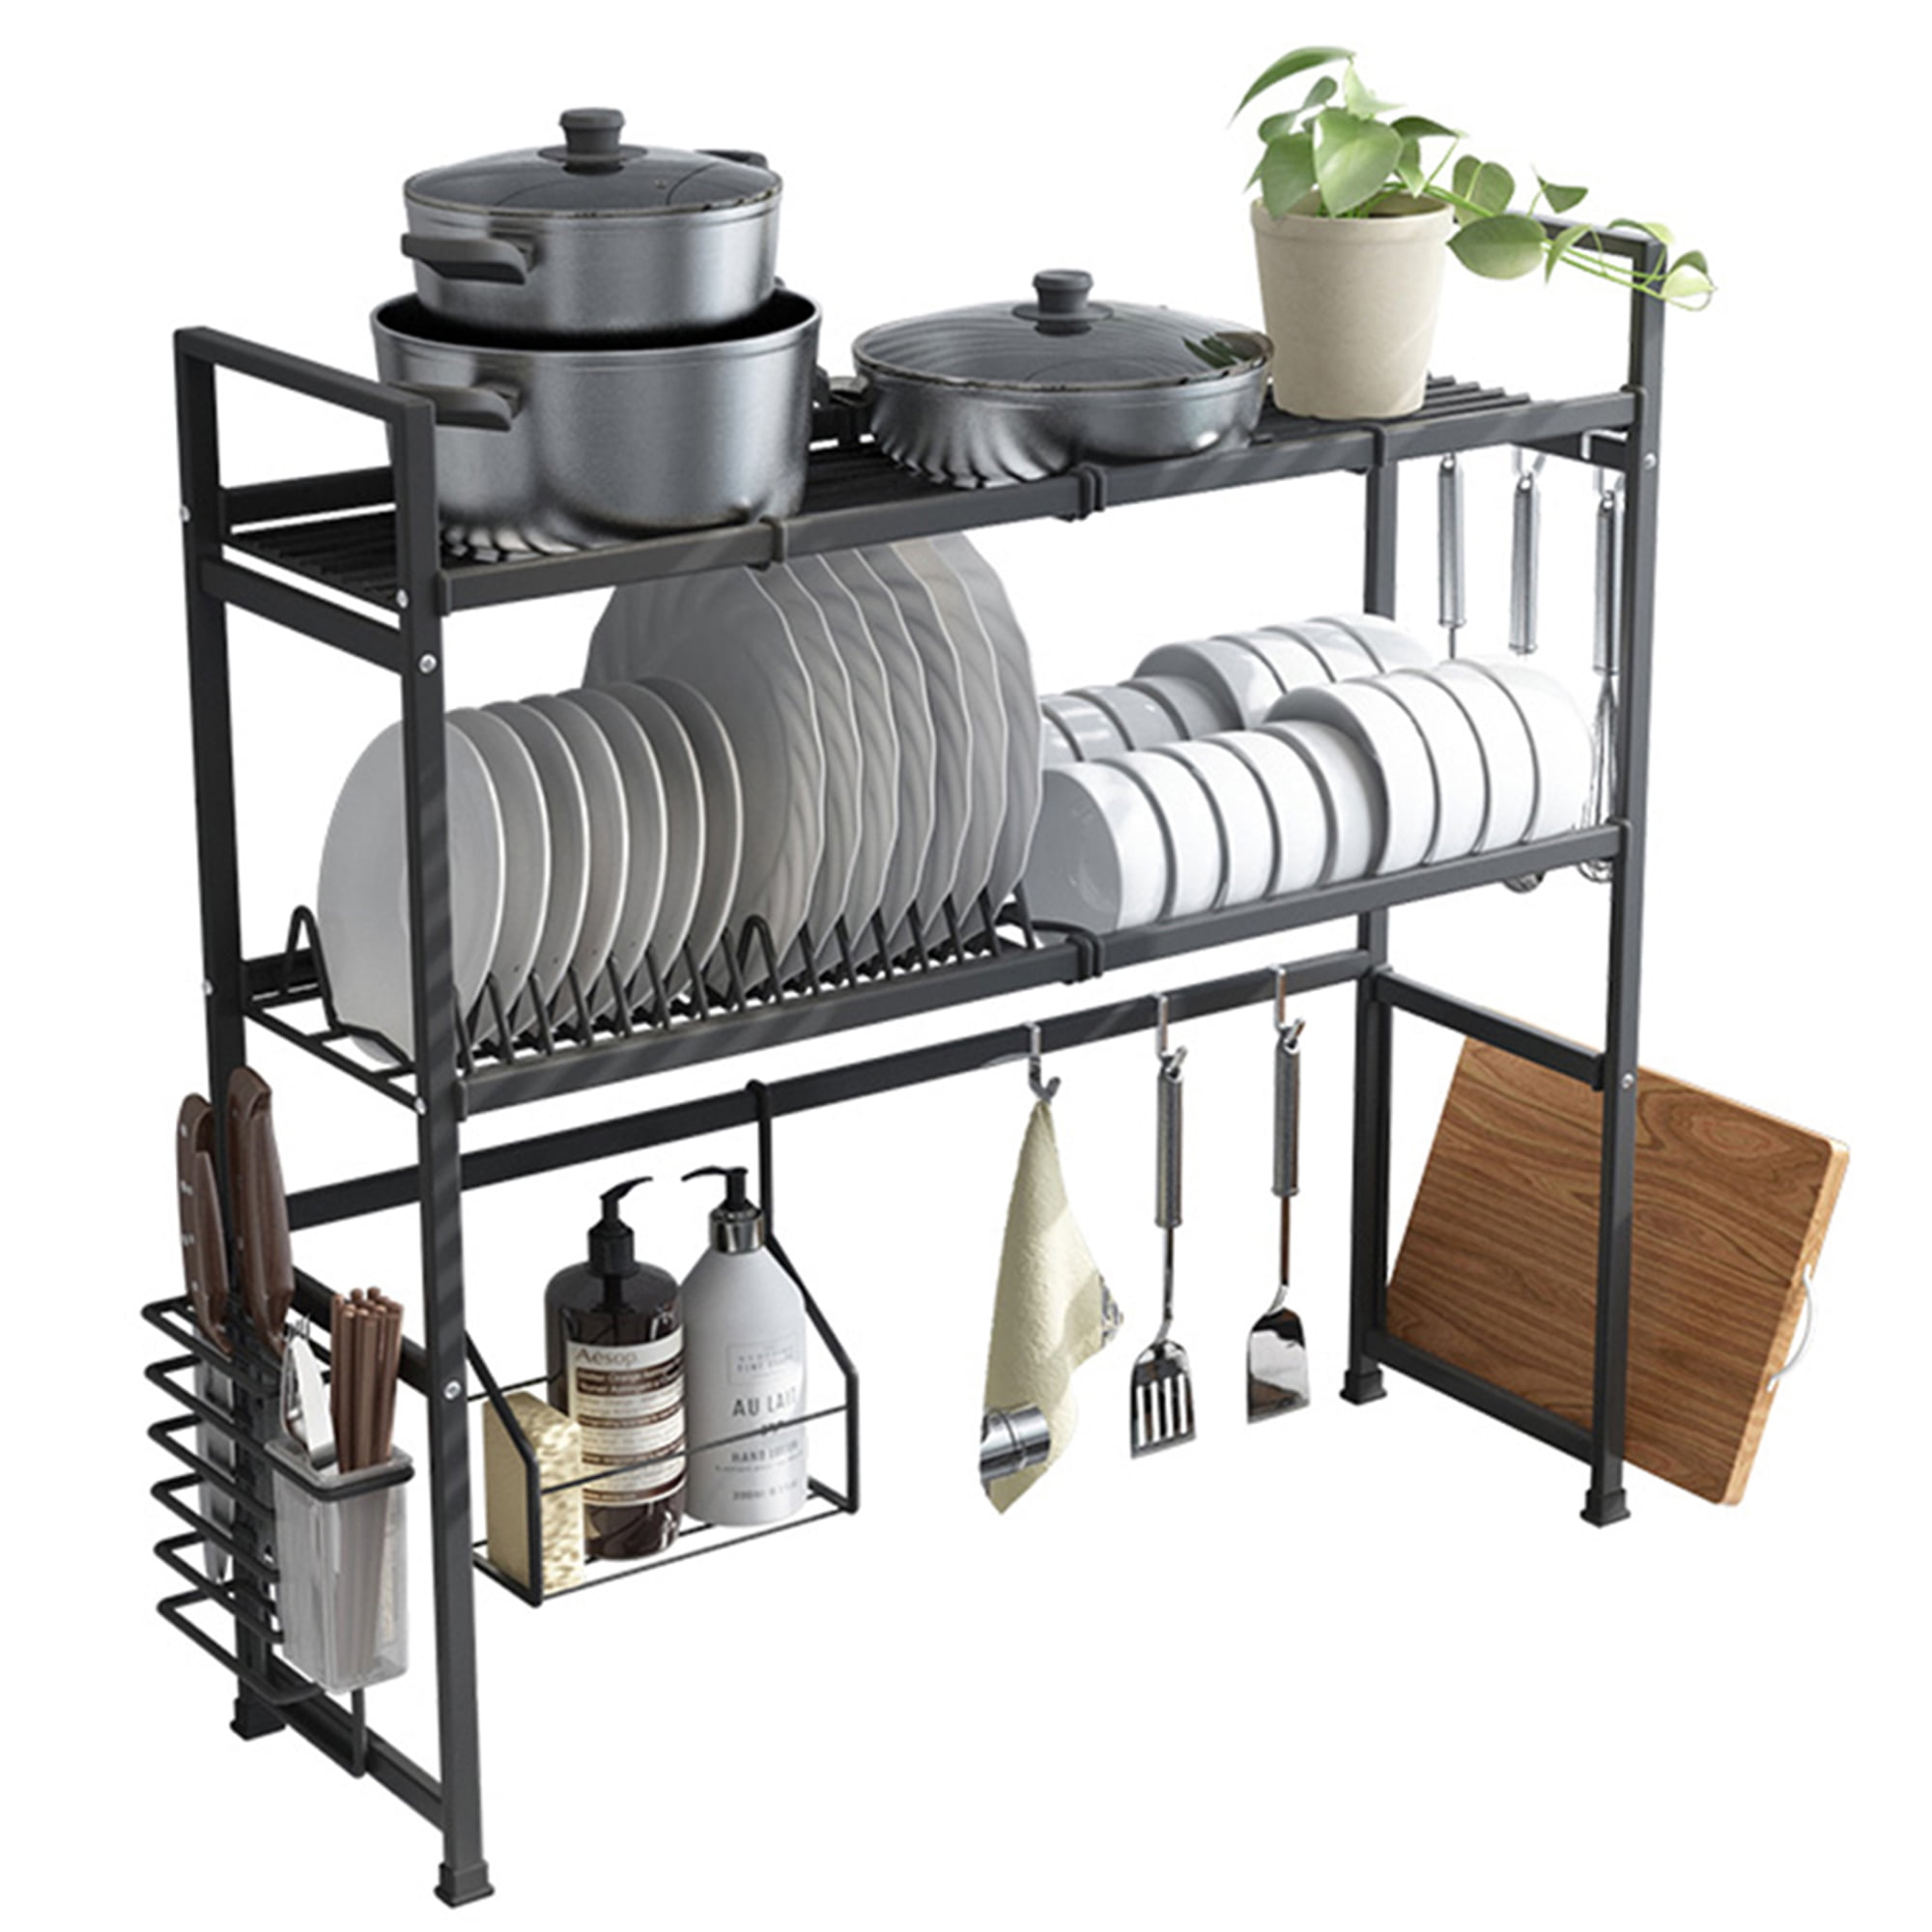 Over the Sink Dish Drying Rack Adjustable 2Tier Large Dish Dryer Rack for Kitchen Organizer